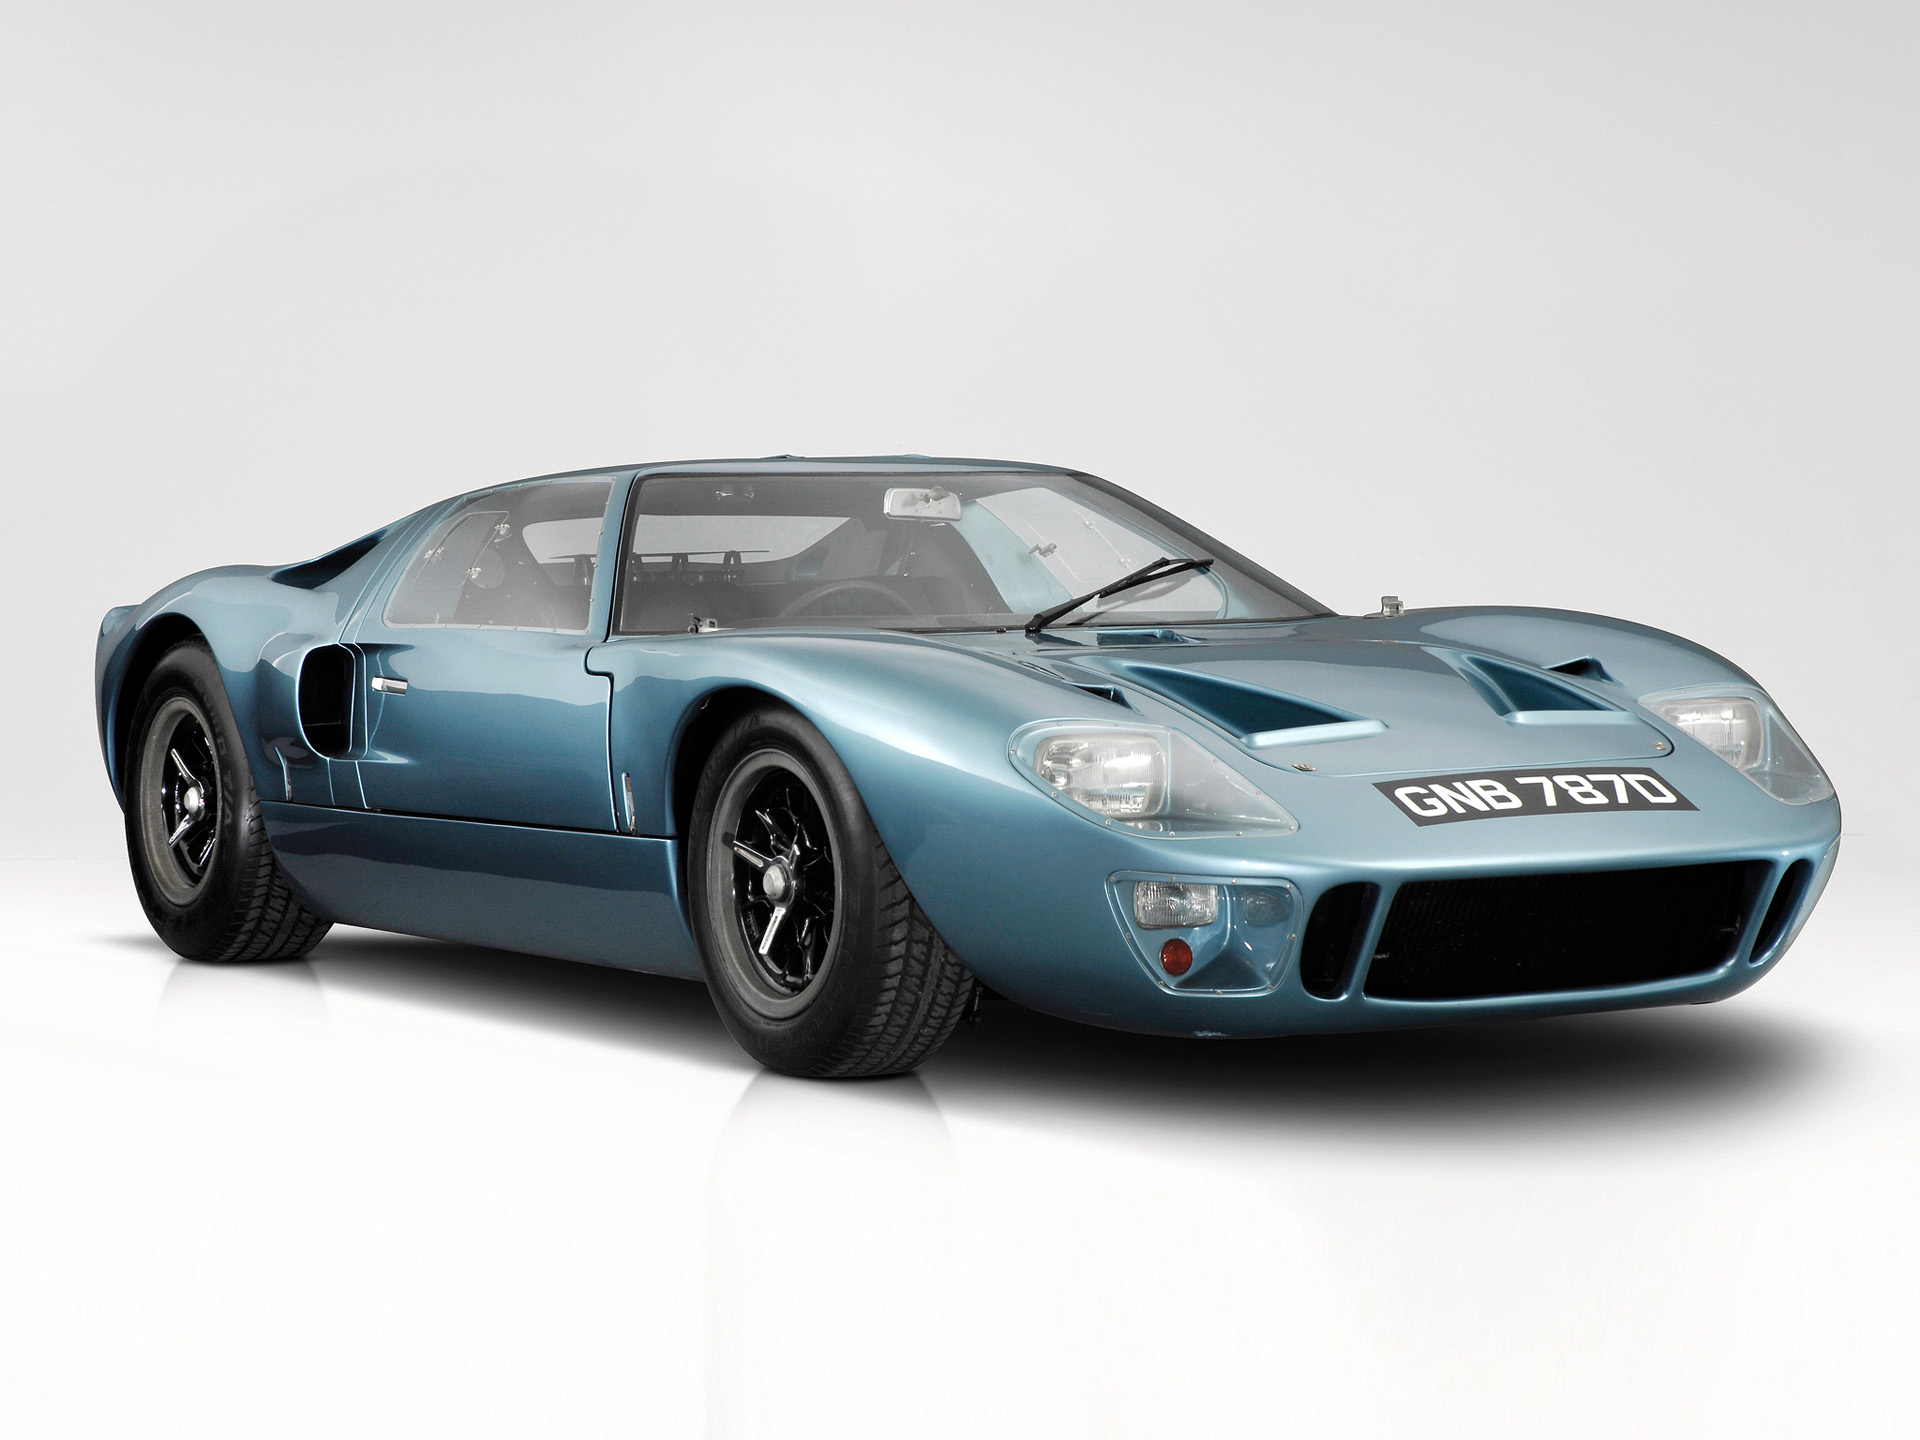 1966, Ford, Gt40, Supercar, Classic, G t, Muscle Wallpaper